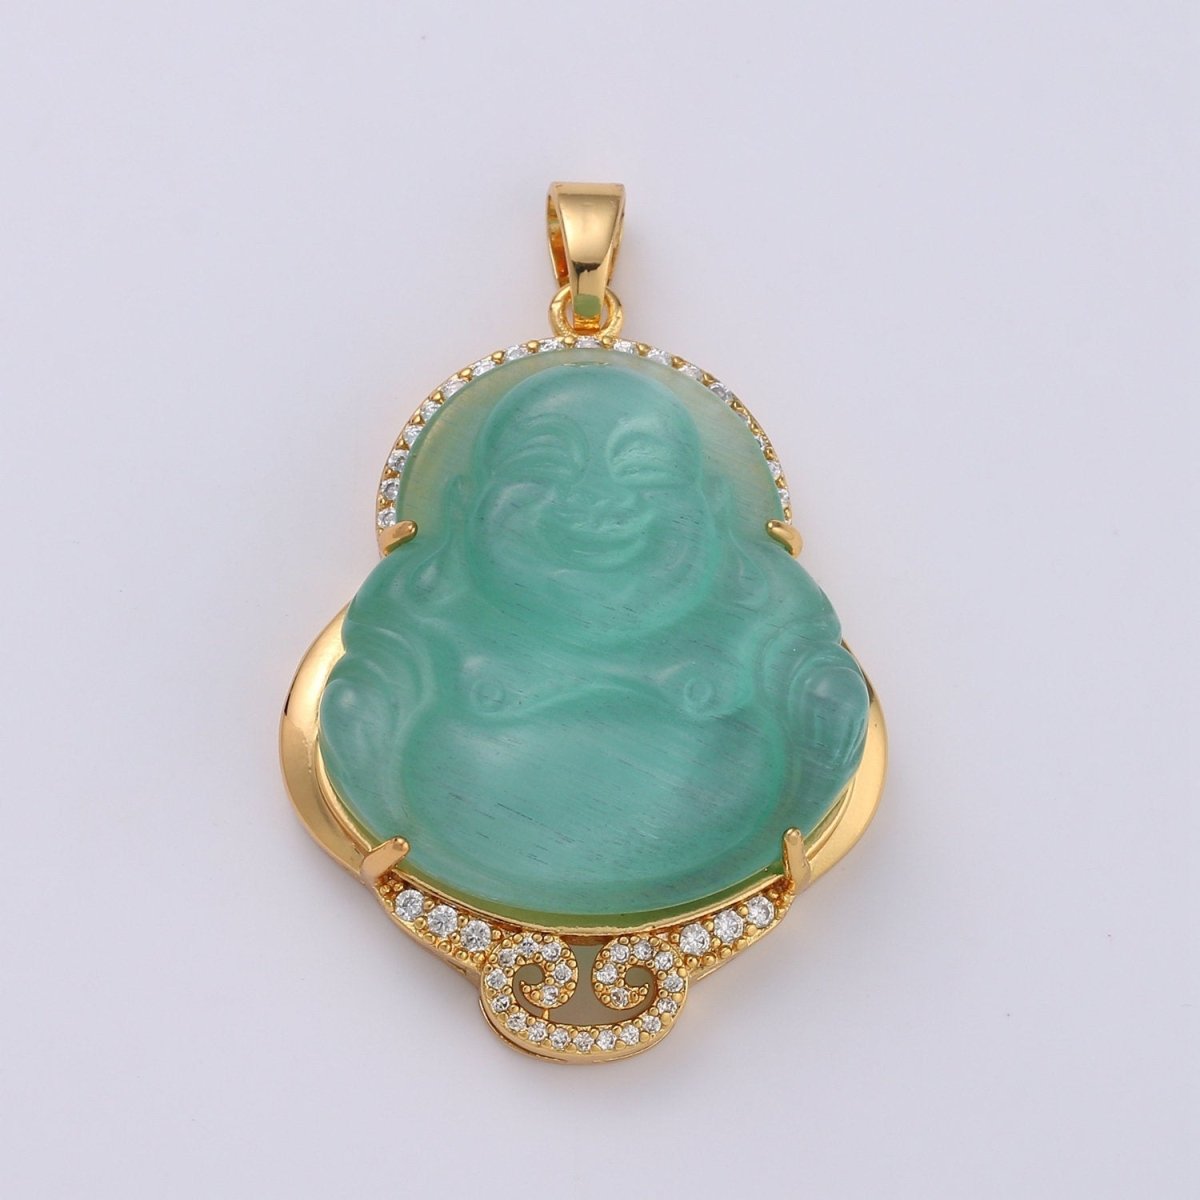 Cat's eye Buddha Cubic Pendant 24K Gold Filled Buddha Pendant Green Cat's Eye Buddha Charm CubicBuddha Necklace for Religious Jewelry Supply O-165 O-166 - DLUXCA